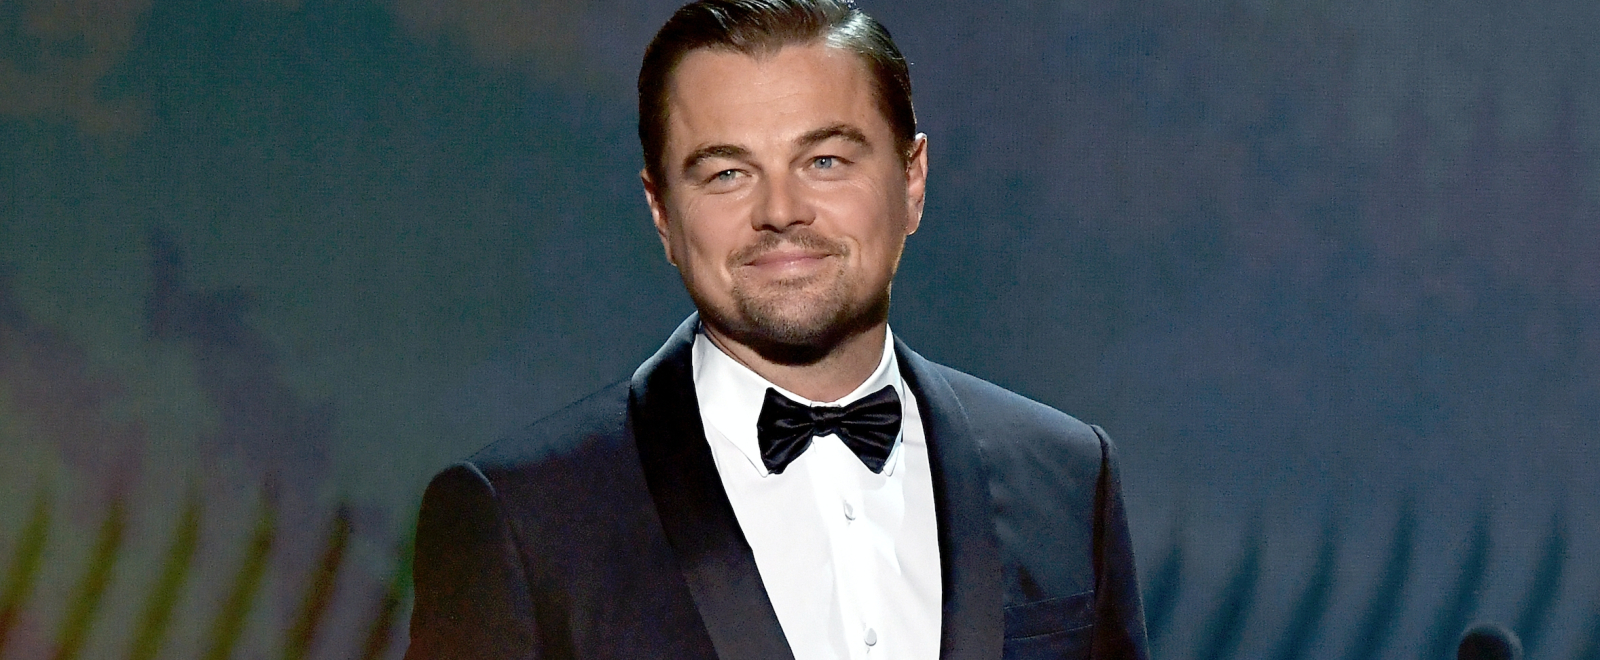 Leonardo DiCaprio Signed A Letter To President Biden Asking Him To ‘Act On Climate Change’